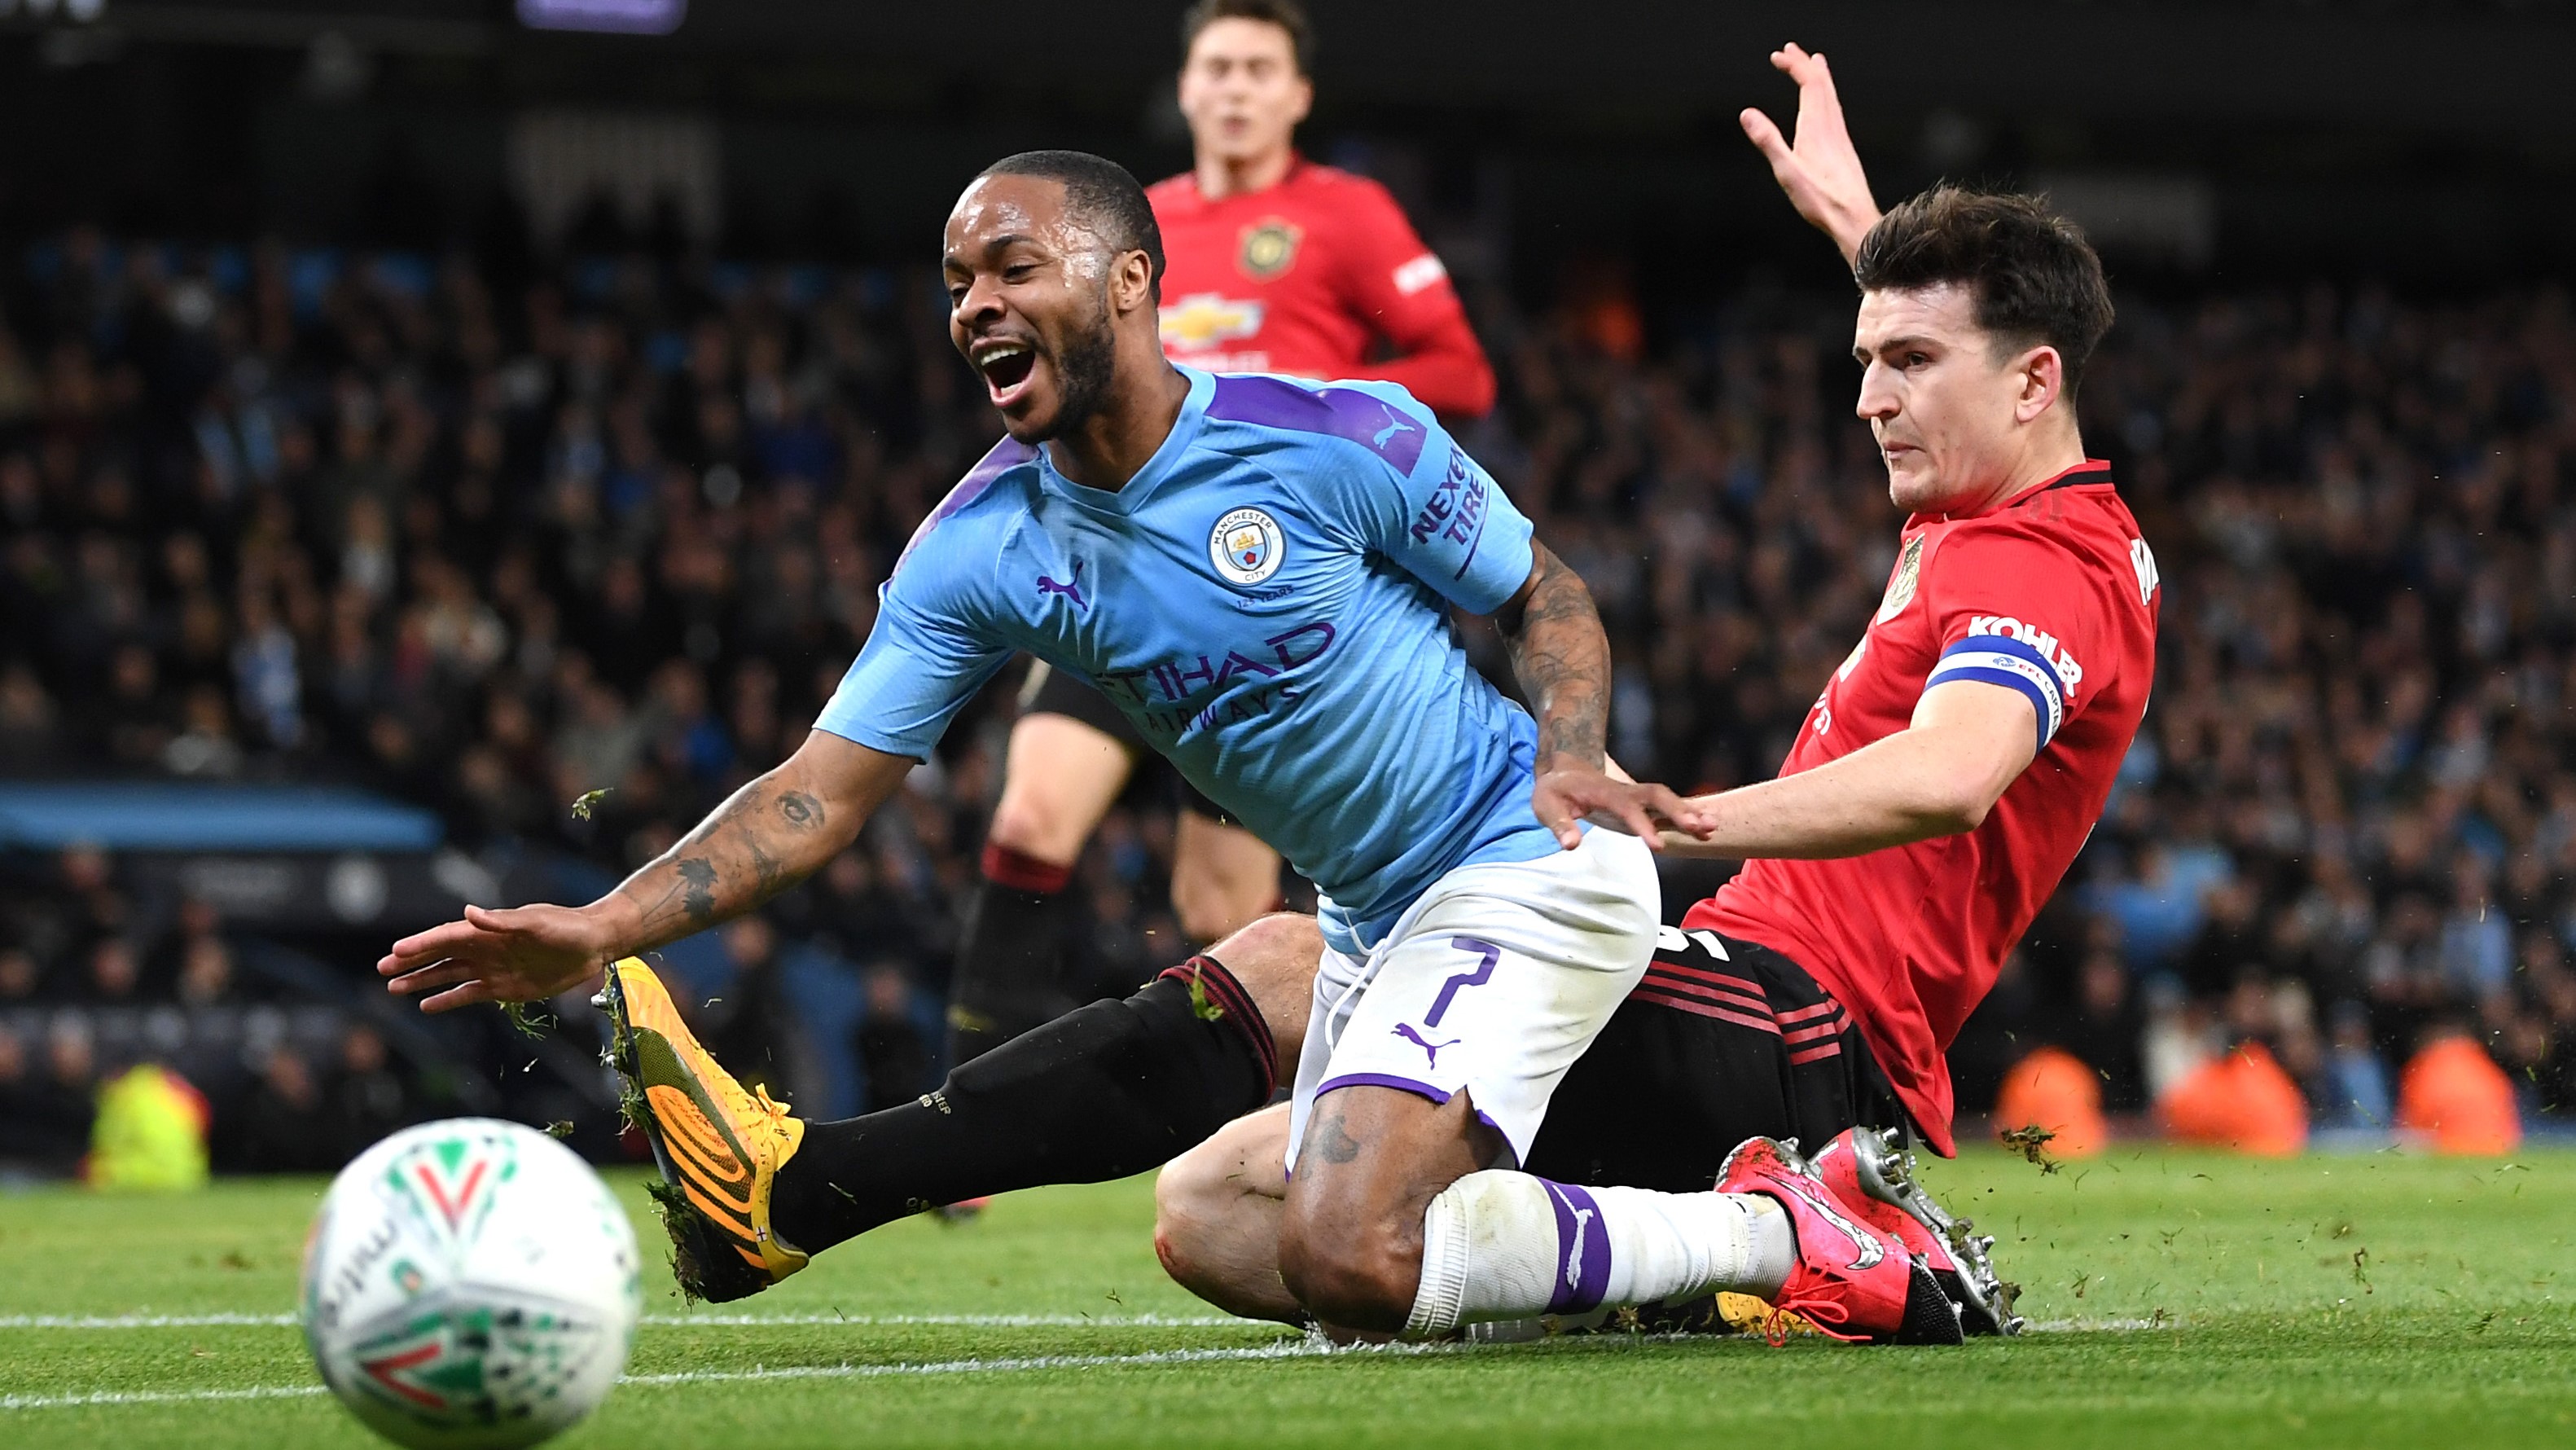 Man United vs Man City live stream how to watch Carabao Cup semifinal